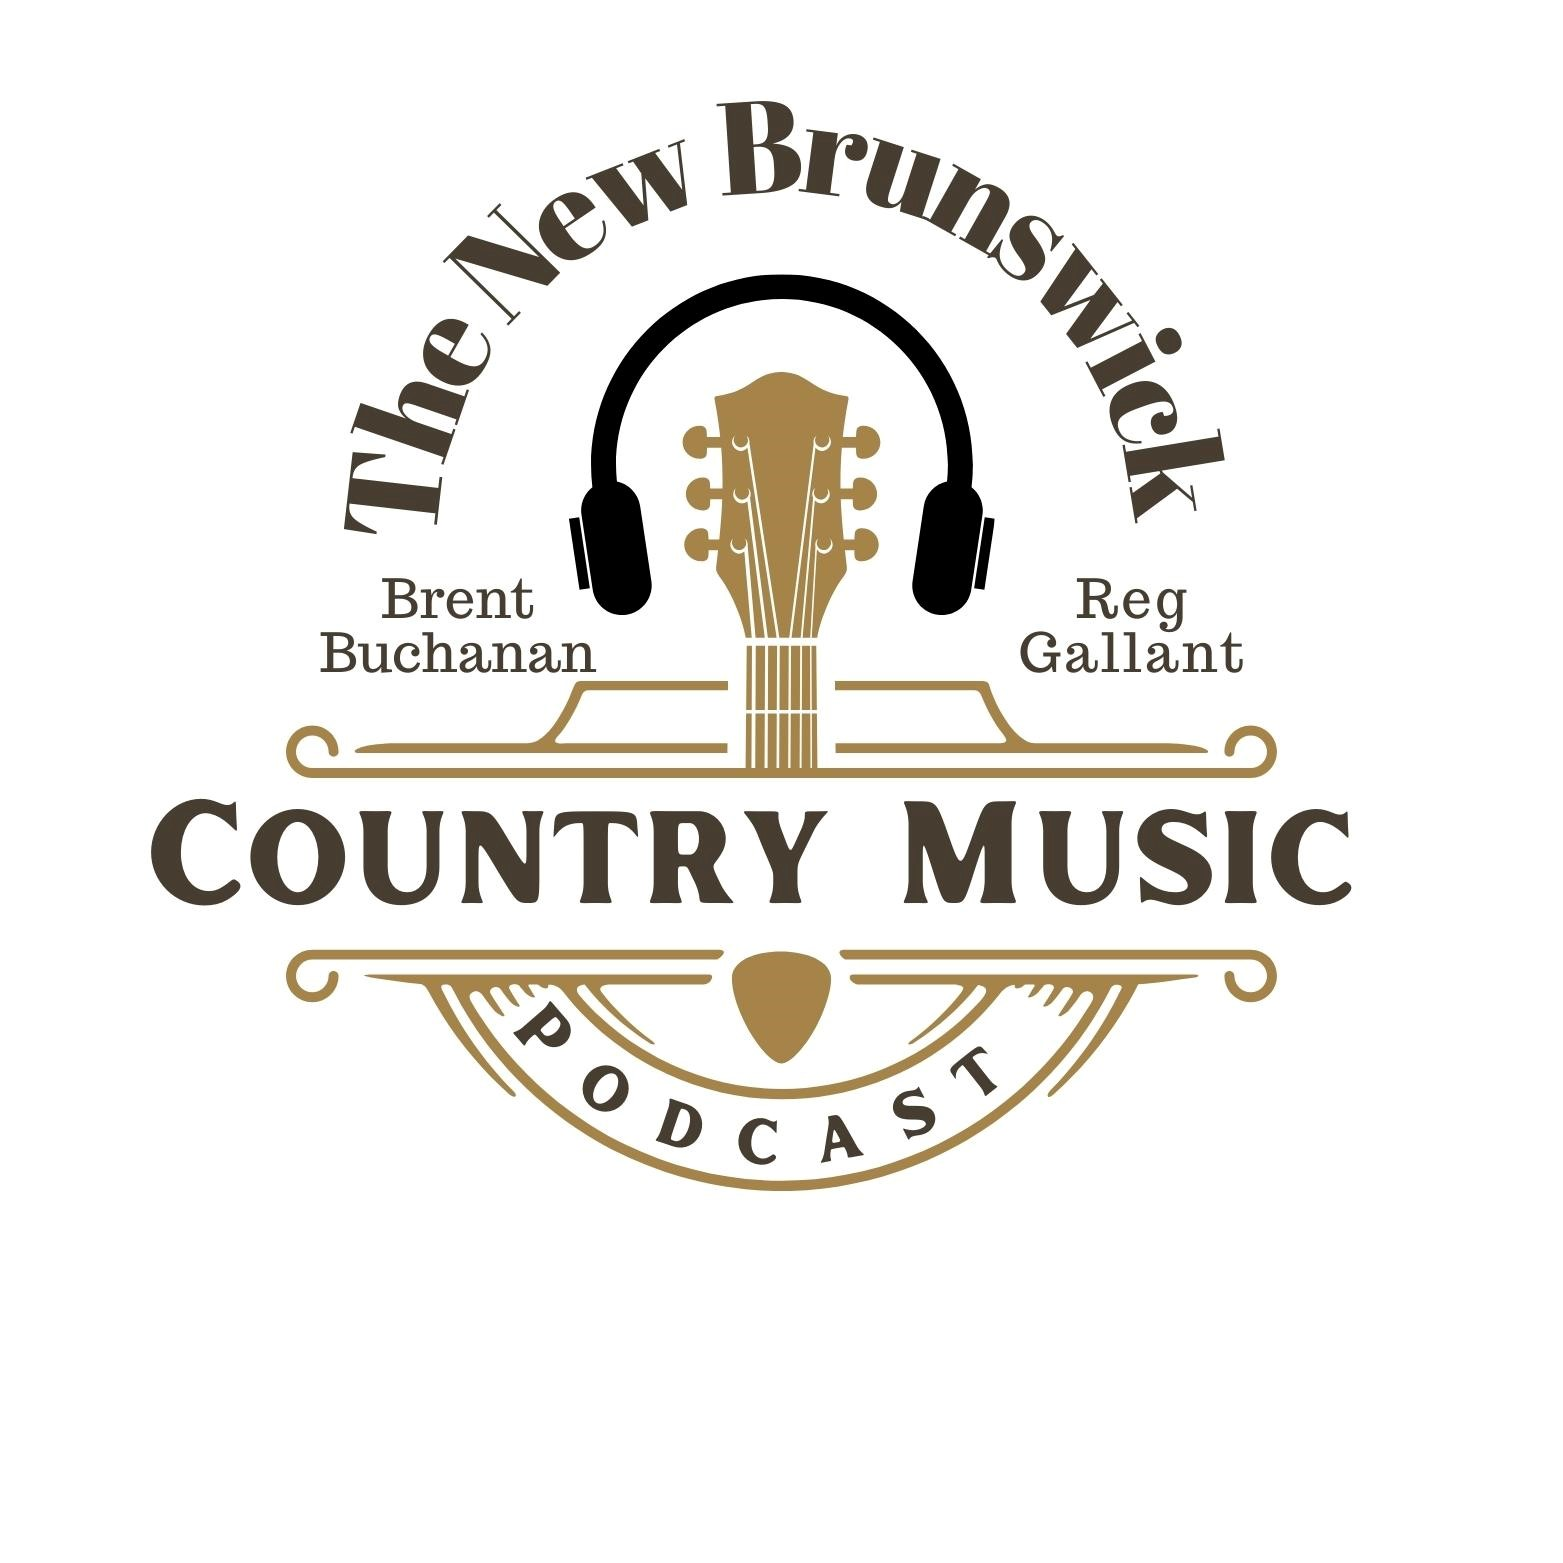 The NB Country Music Podcast welcomes Oland Monteith to the studio!!